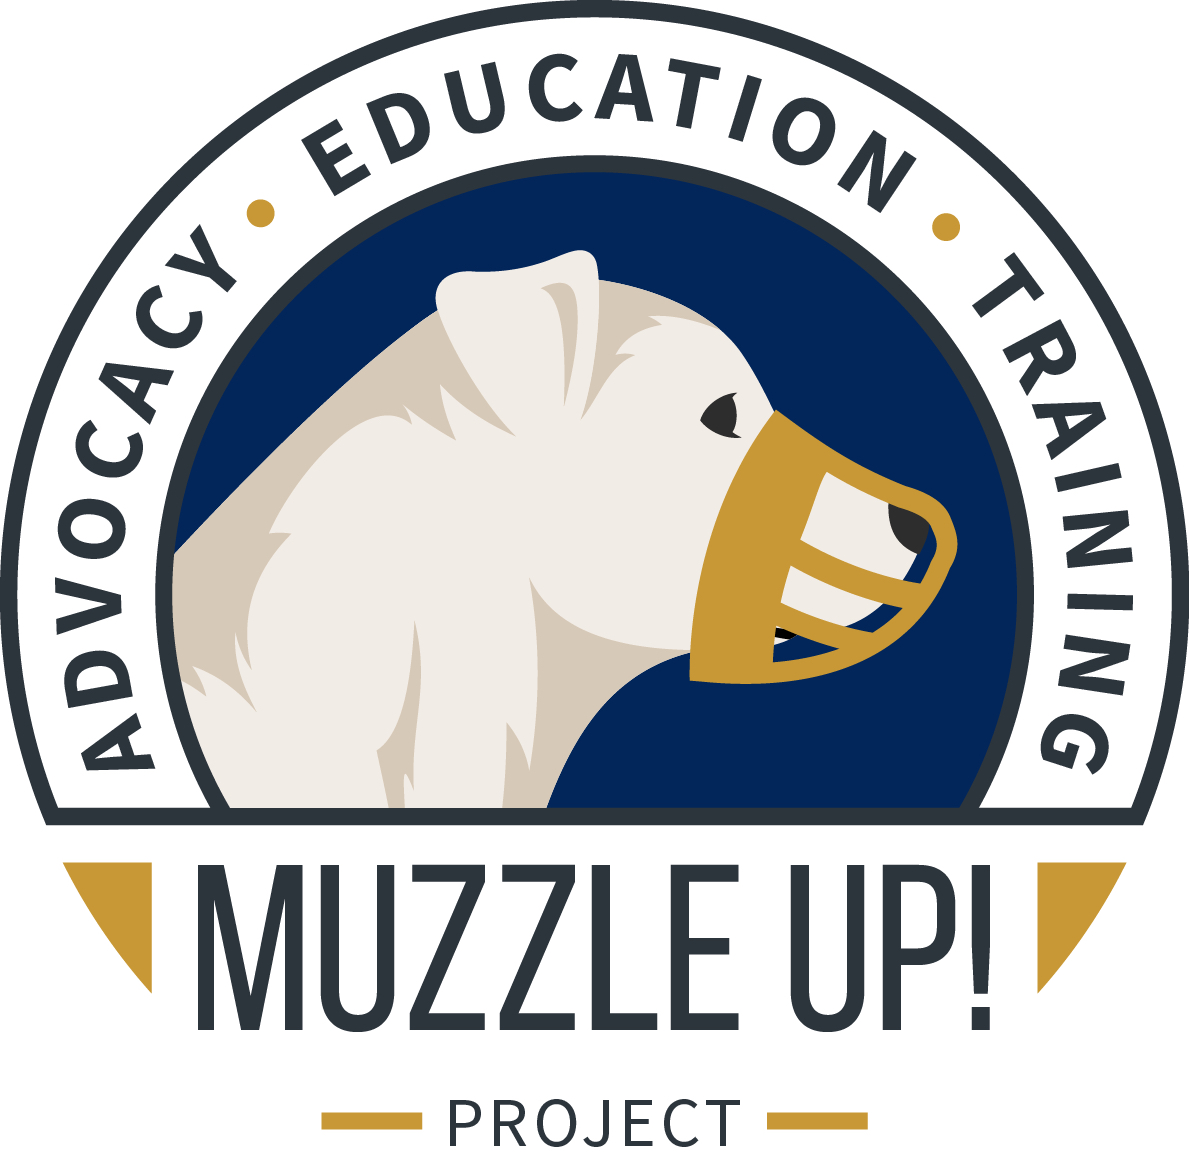 The Muzzle Up Project Logo